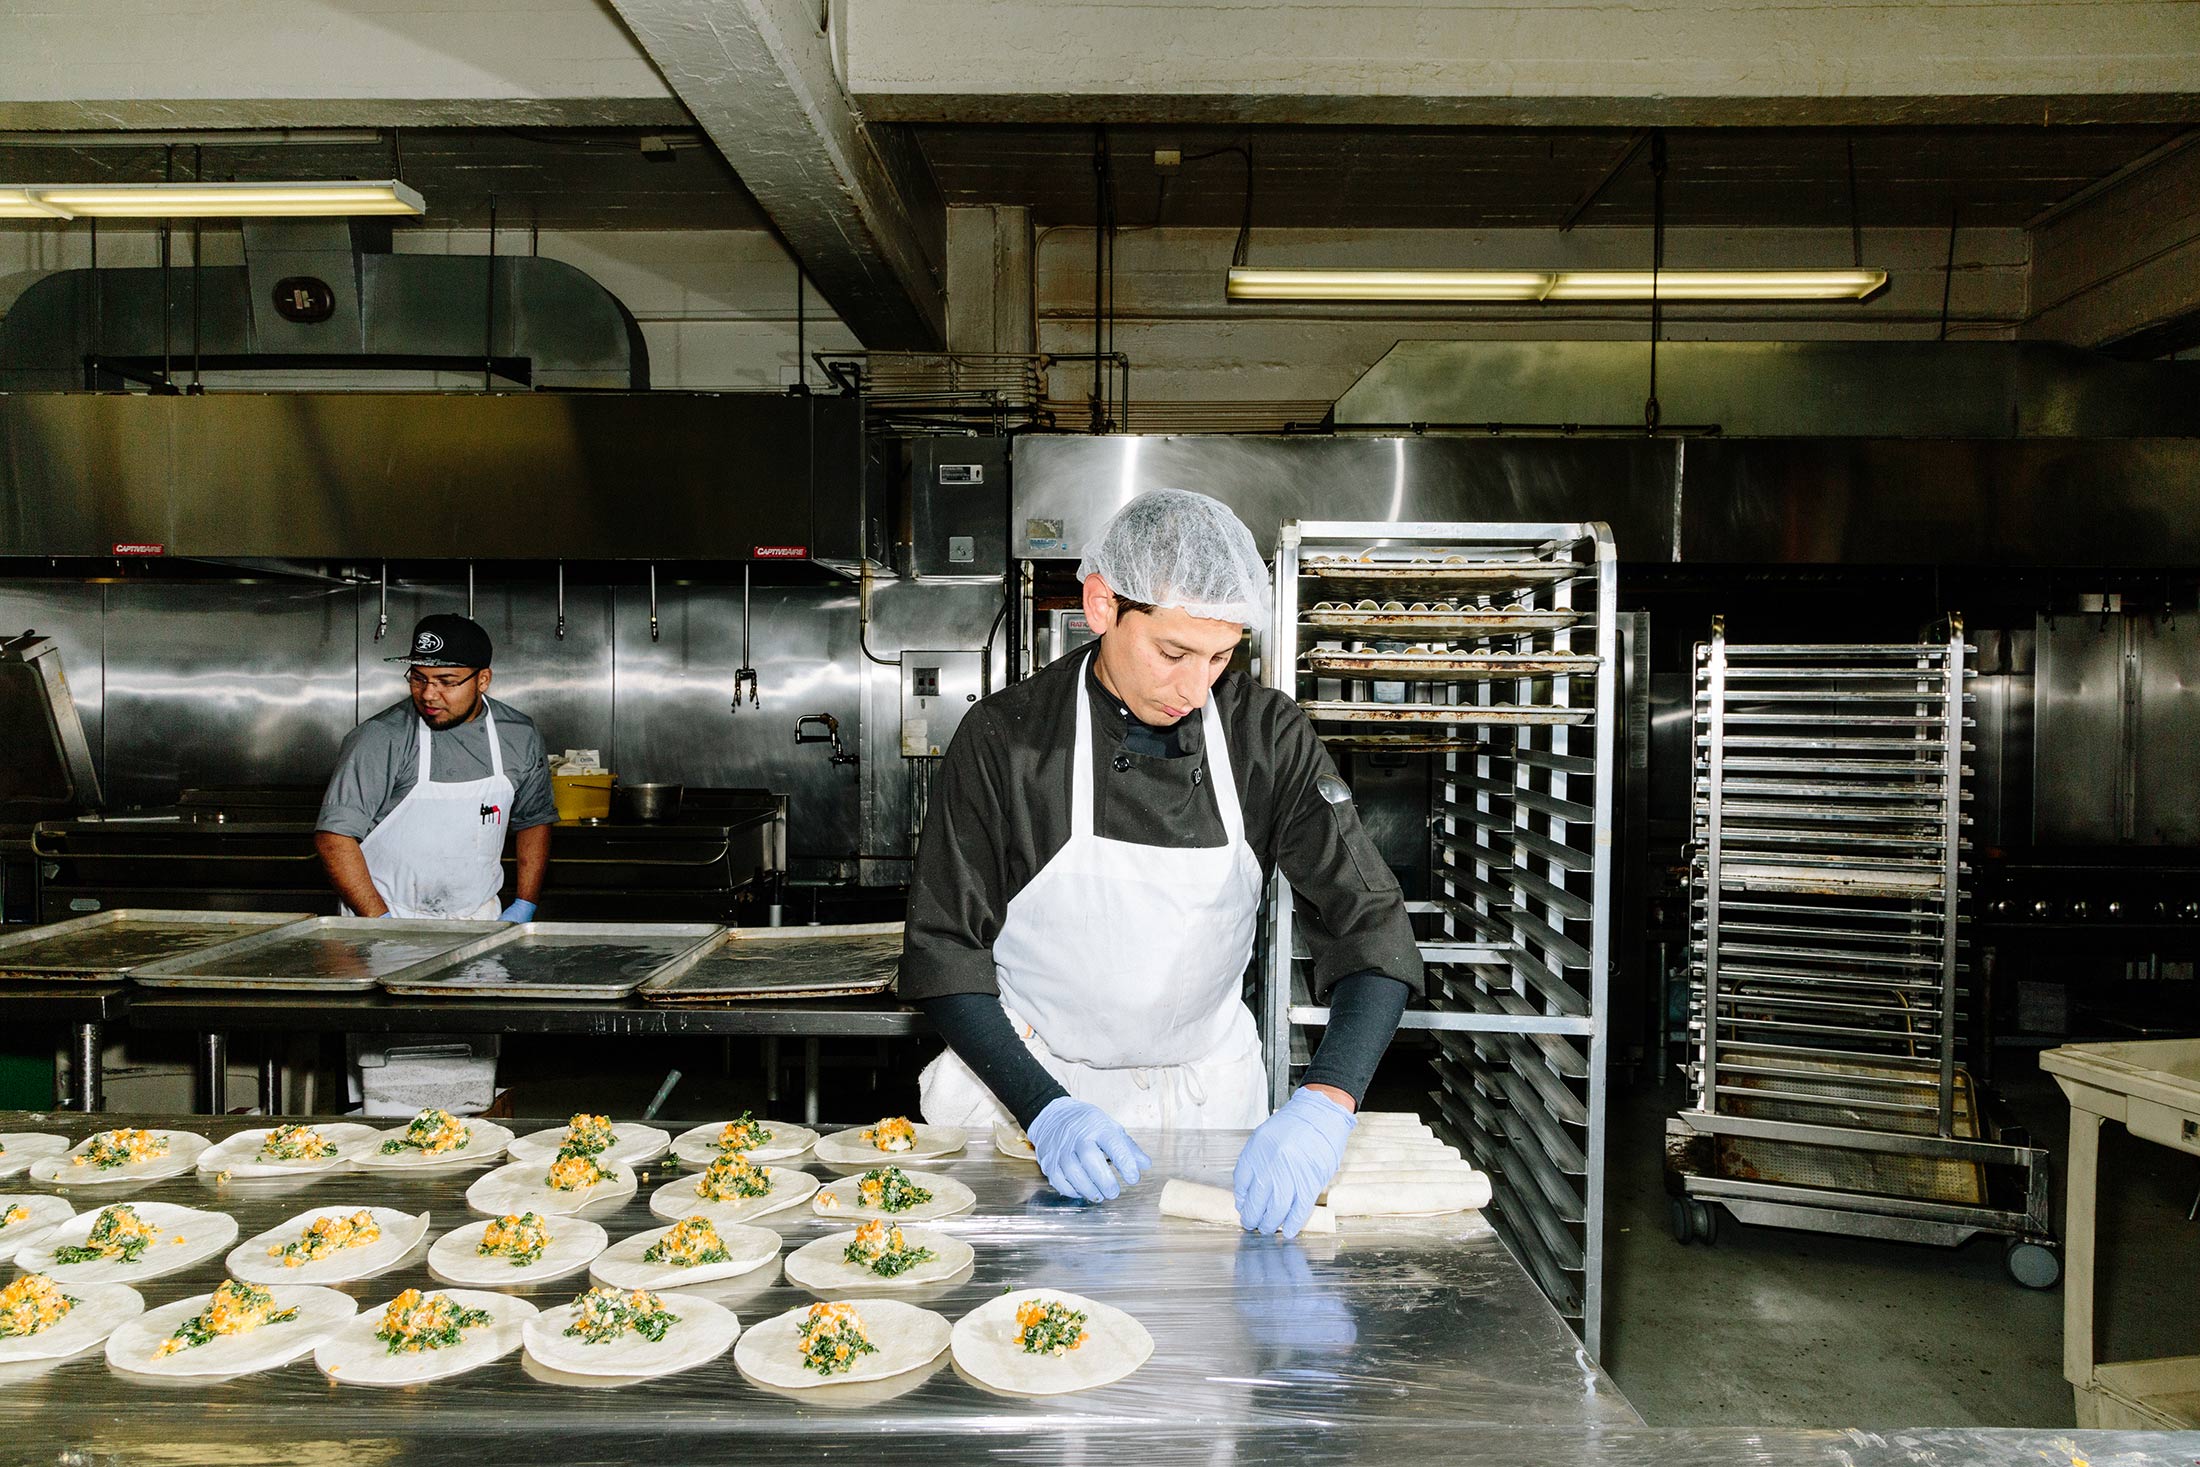 A worker prepares meals at the San Francisco kitchen.
